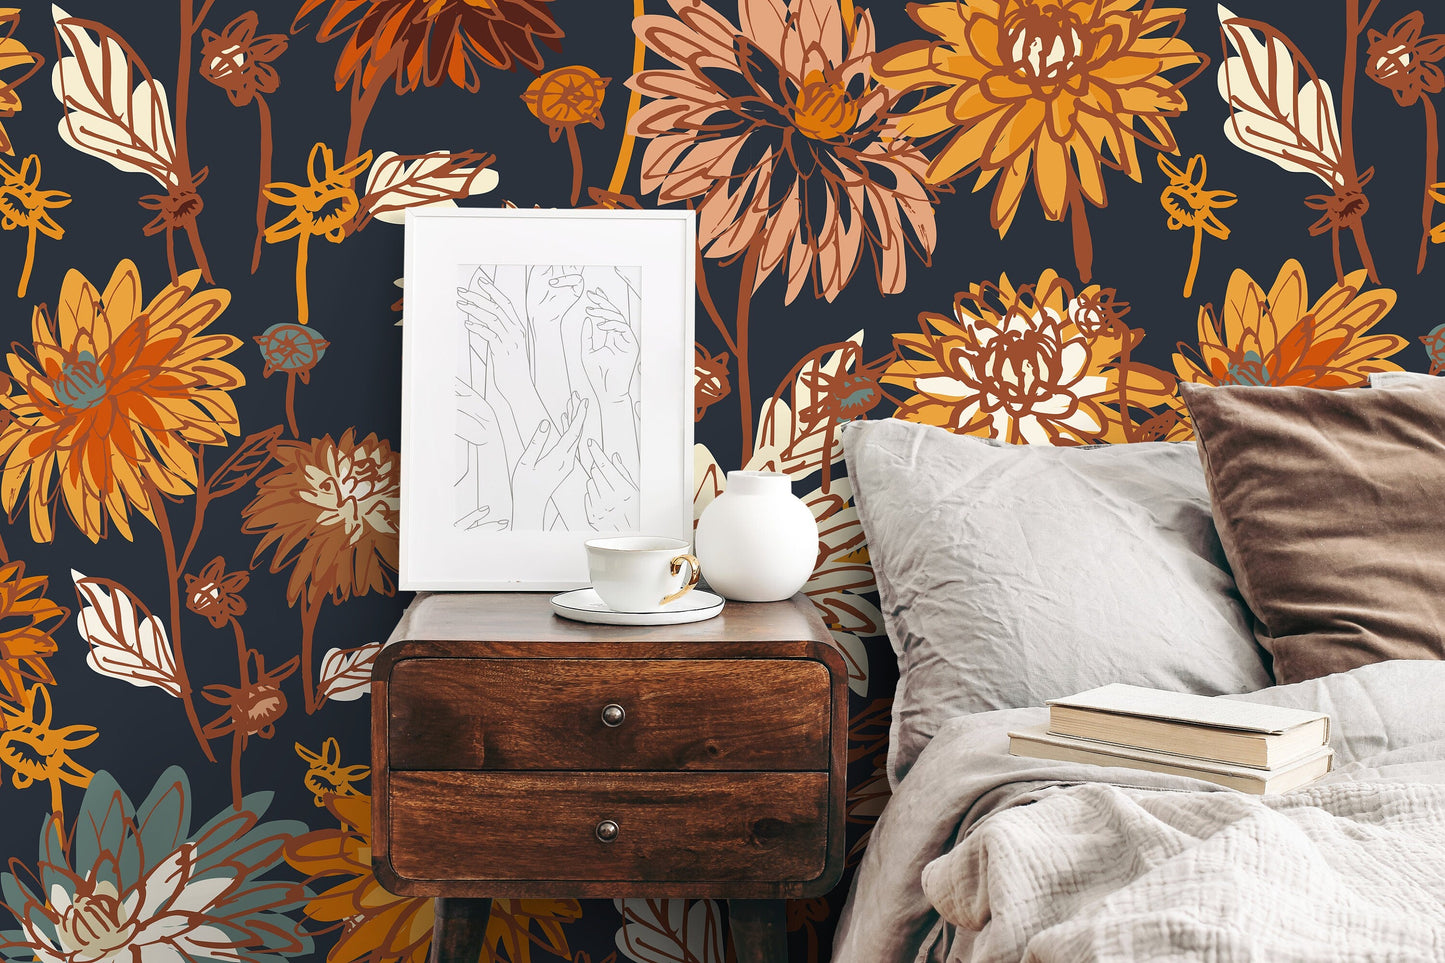 Daisy Floral Drawing Wallpaper / Peel and Stick Wallpaper Removable Wallpaper Home Decor Wall Art Wall Decor Room Decor - C693